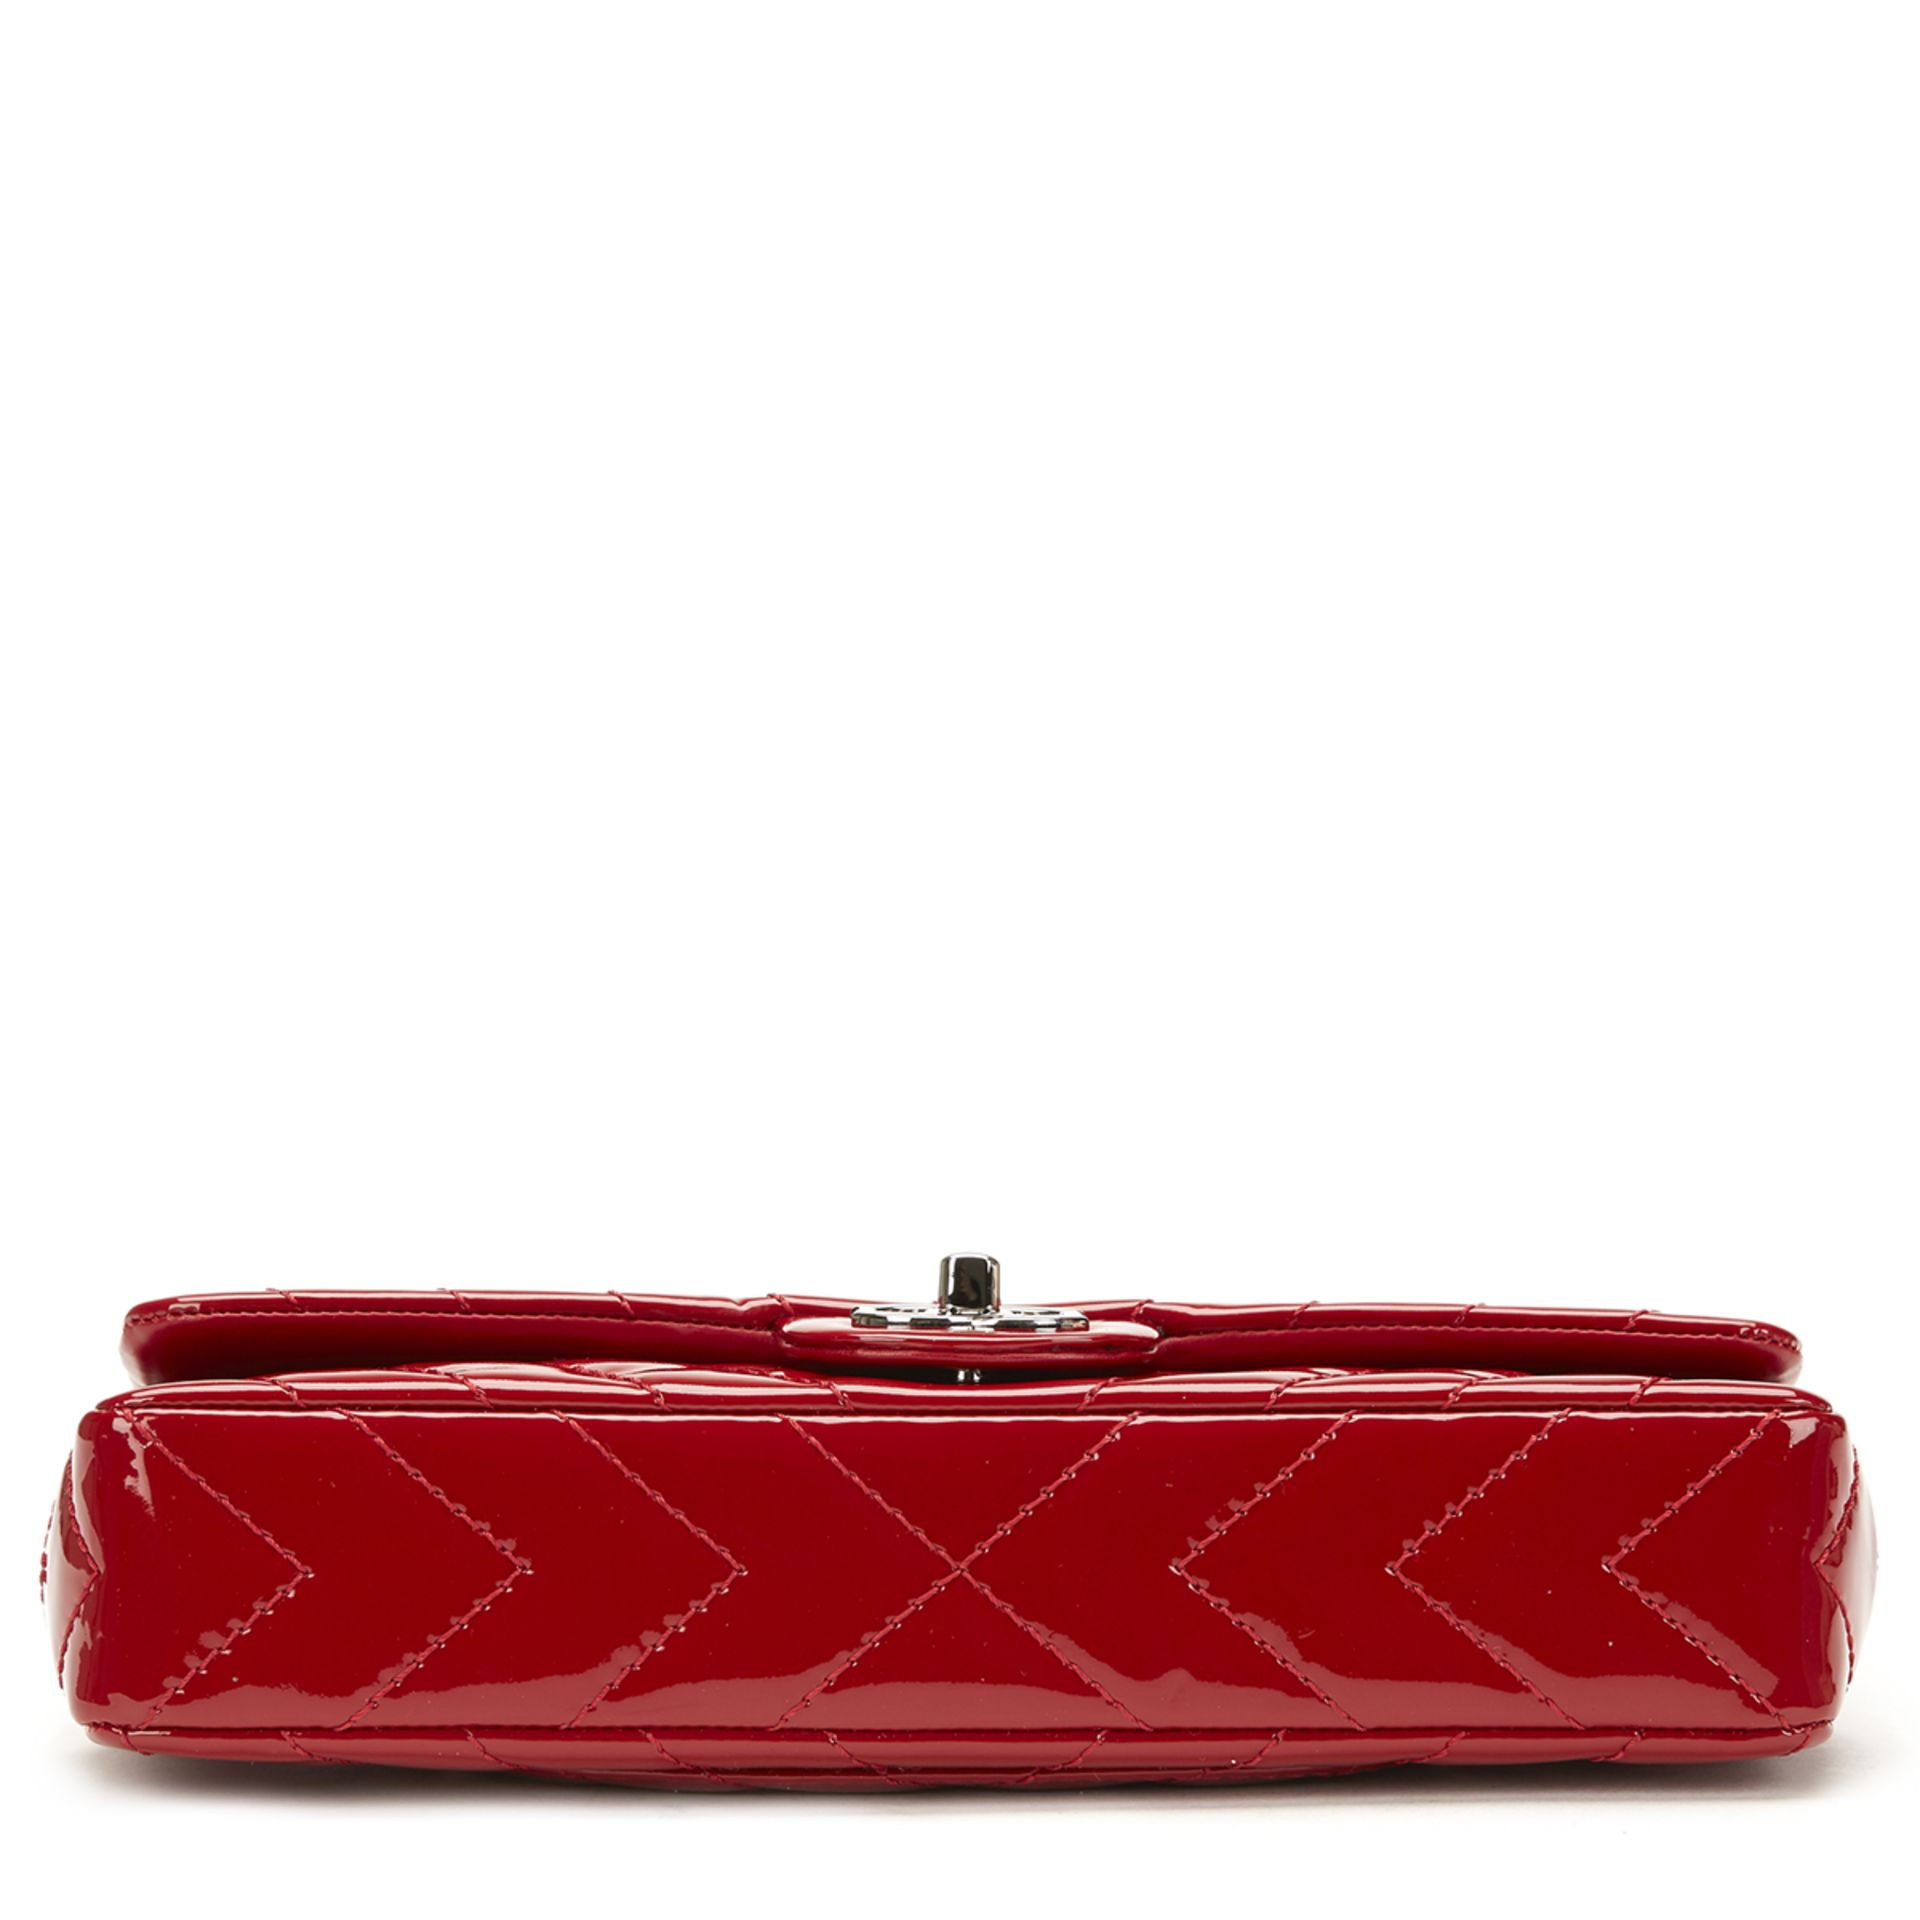 CHANEL East West Classic Single Flap Bag - Image 5 of 9